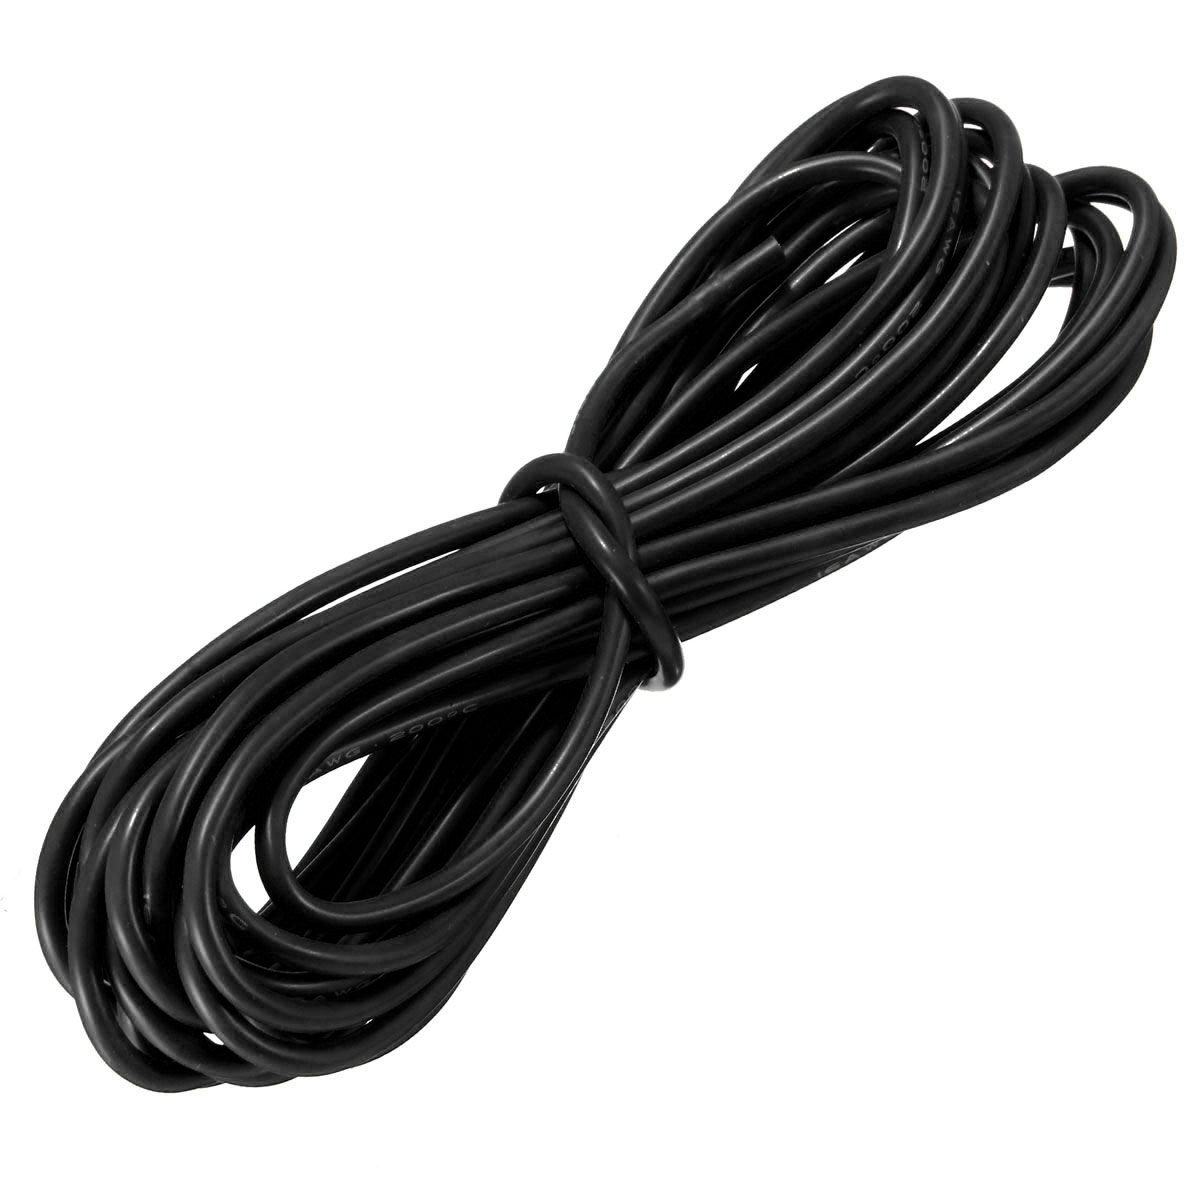 DANIU-5-Meter-Black-Silicone-Wire-Cable-10121416182022AWG-Flexible-Cable-1170293-5